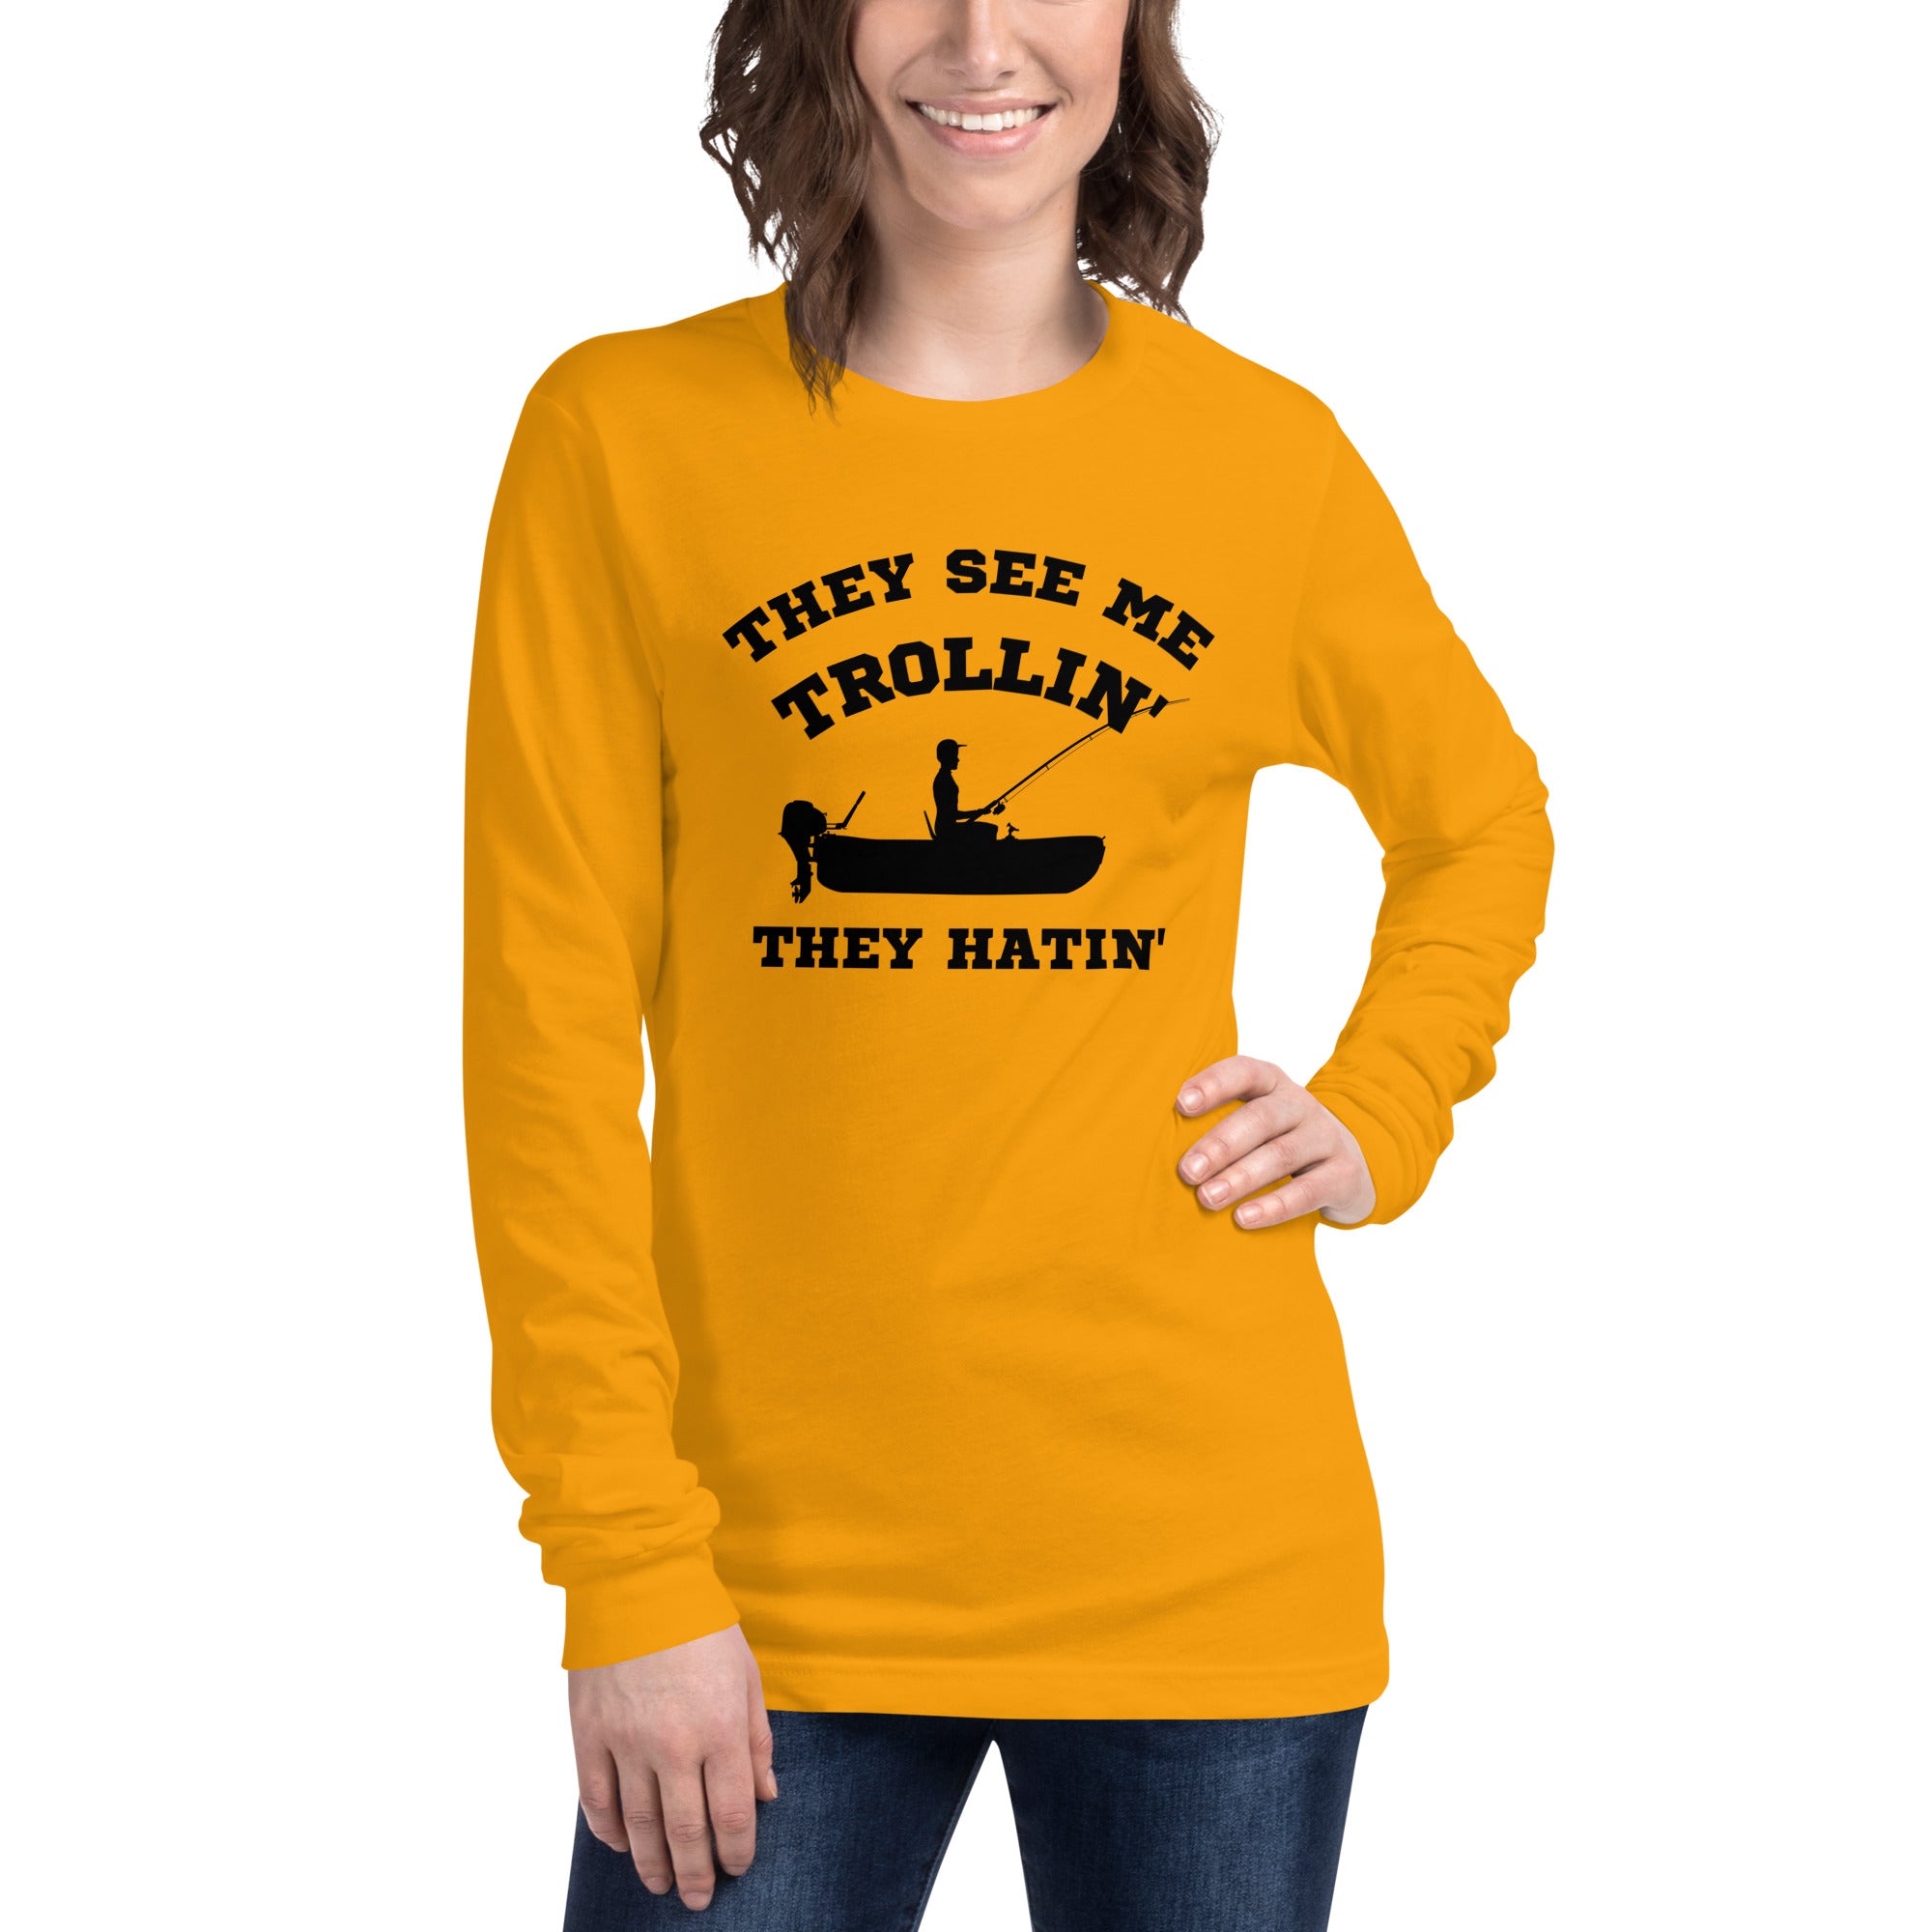 They See Me Trollin' Women's Select Long Sleeve